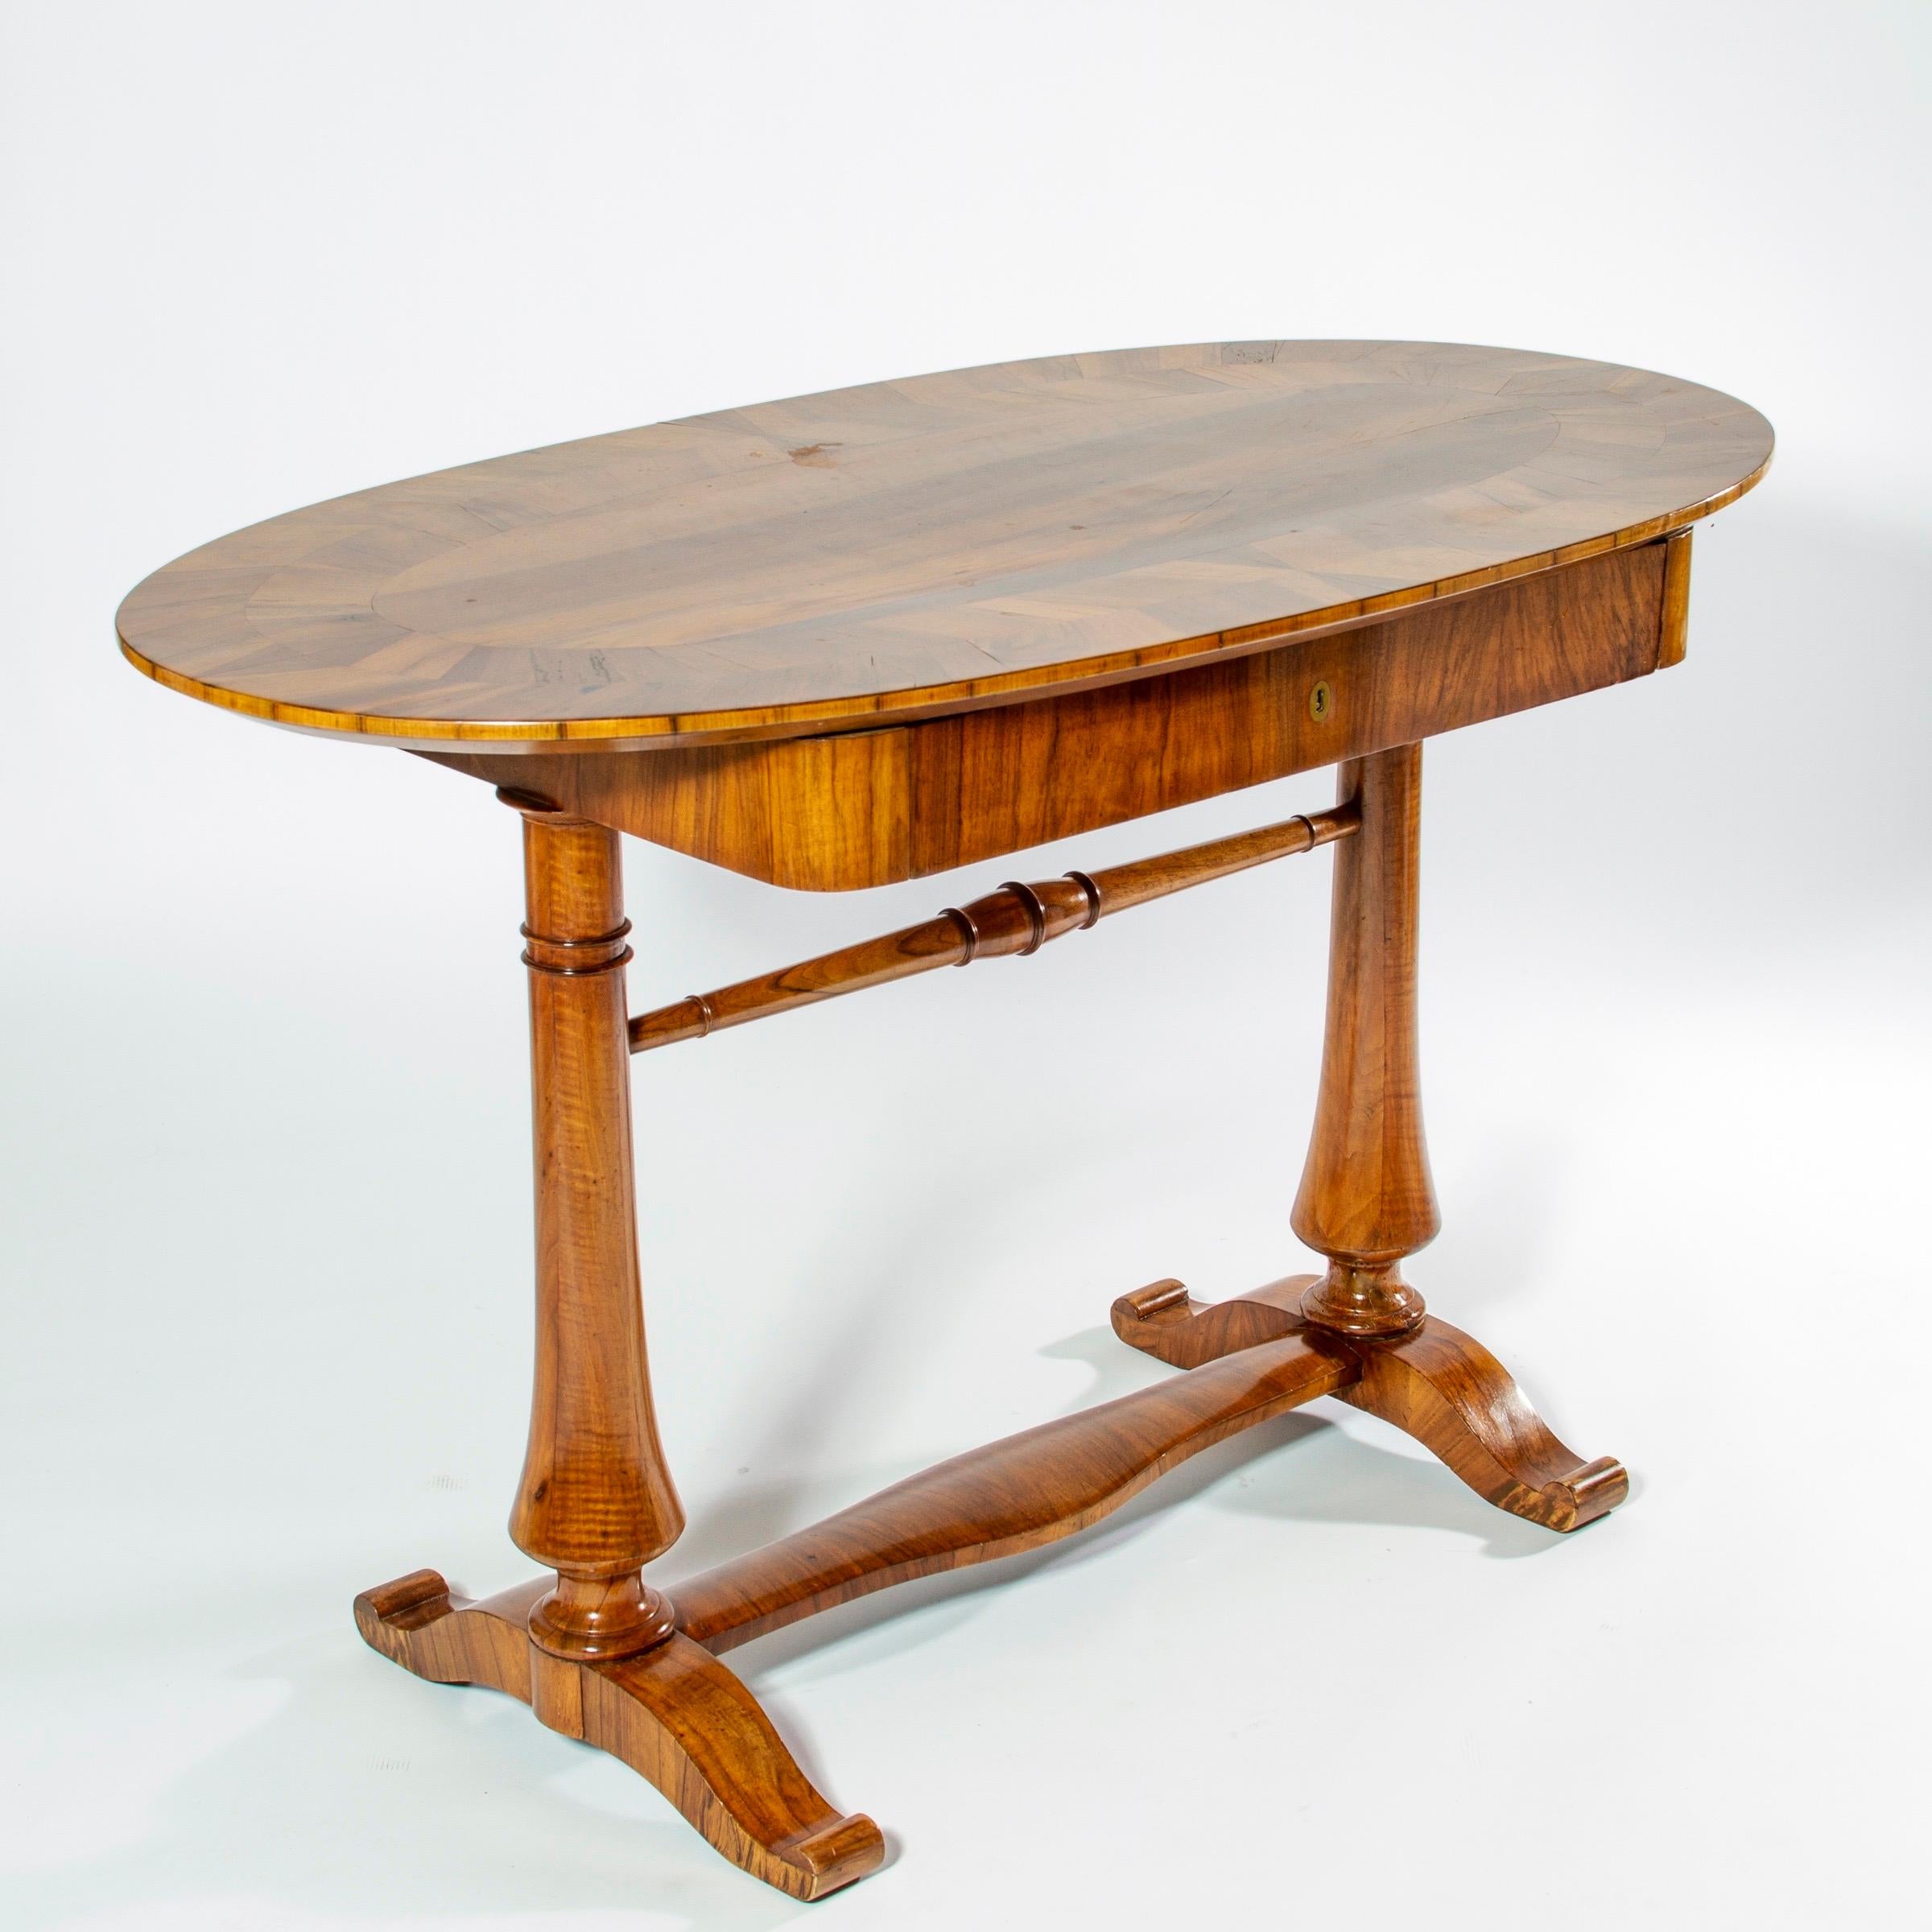 Hand-Carved Swedish Biedermeier Oval Desk or Table with Drawer, 19th Century, Sweden  For Sale